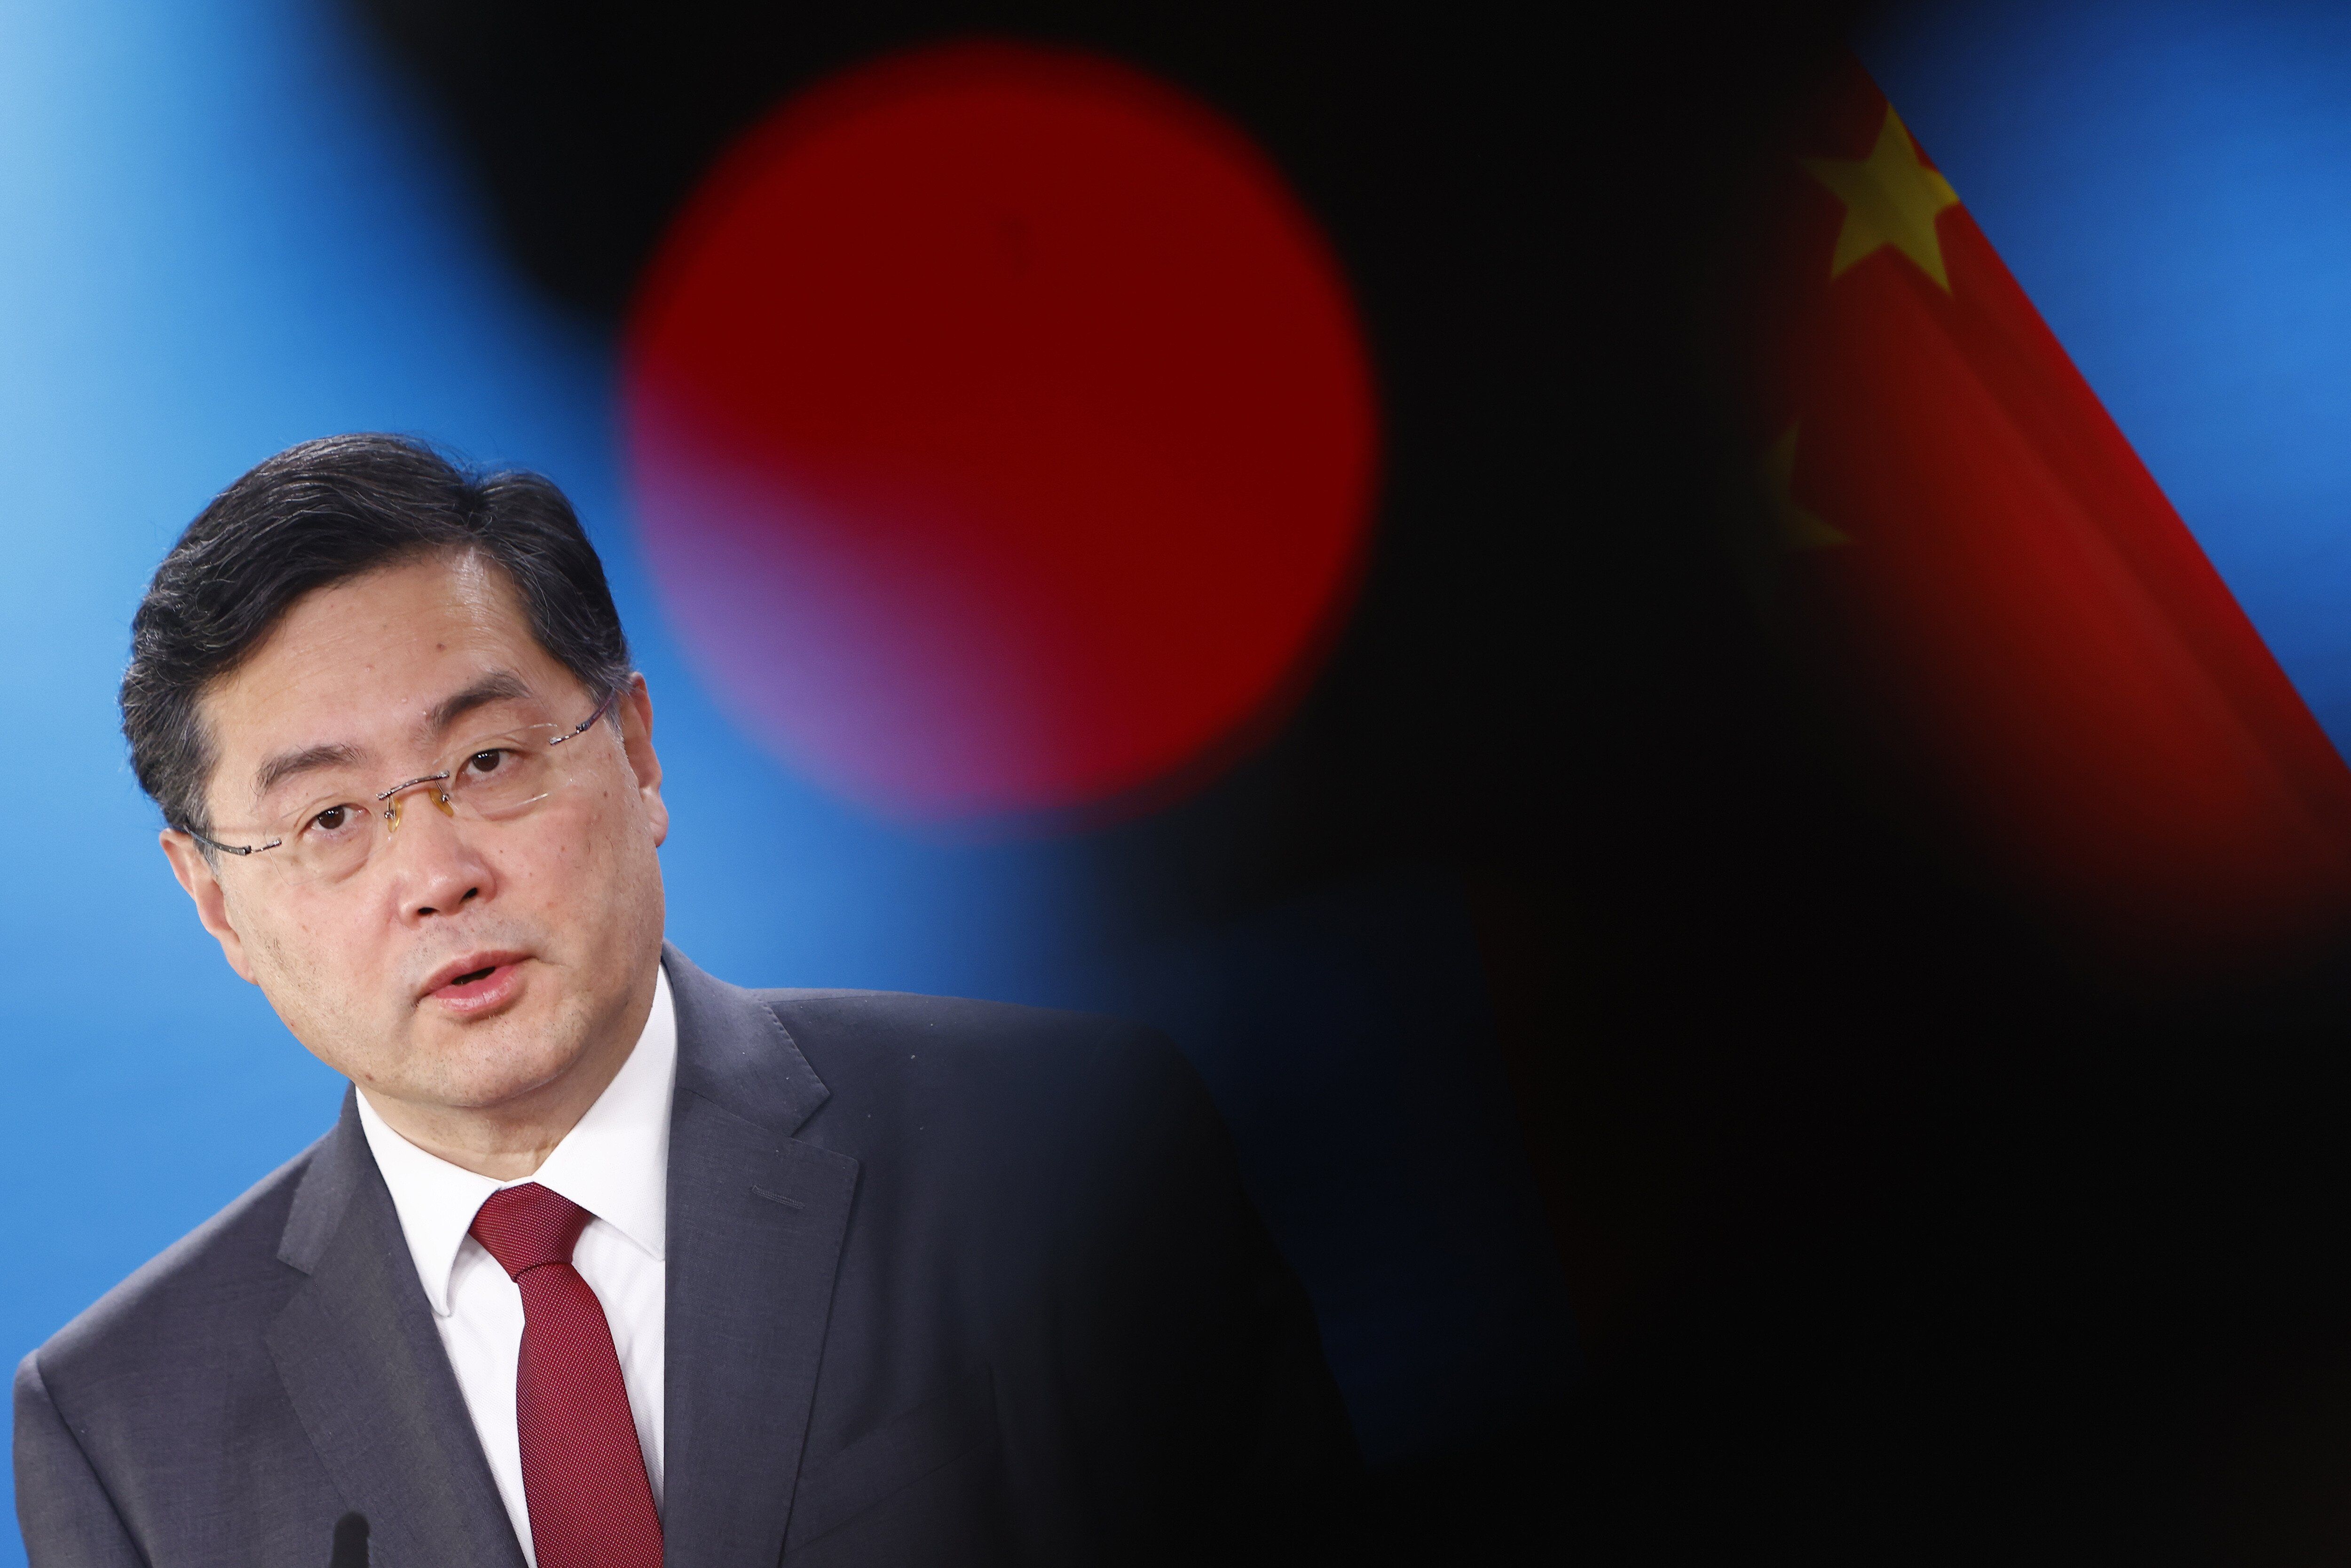 Chinese Foreign Minister Qin Gang address the media in Berlin, Germany.